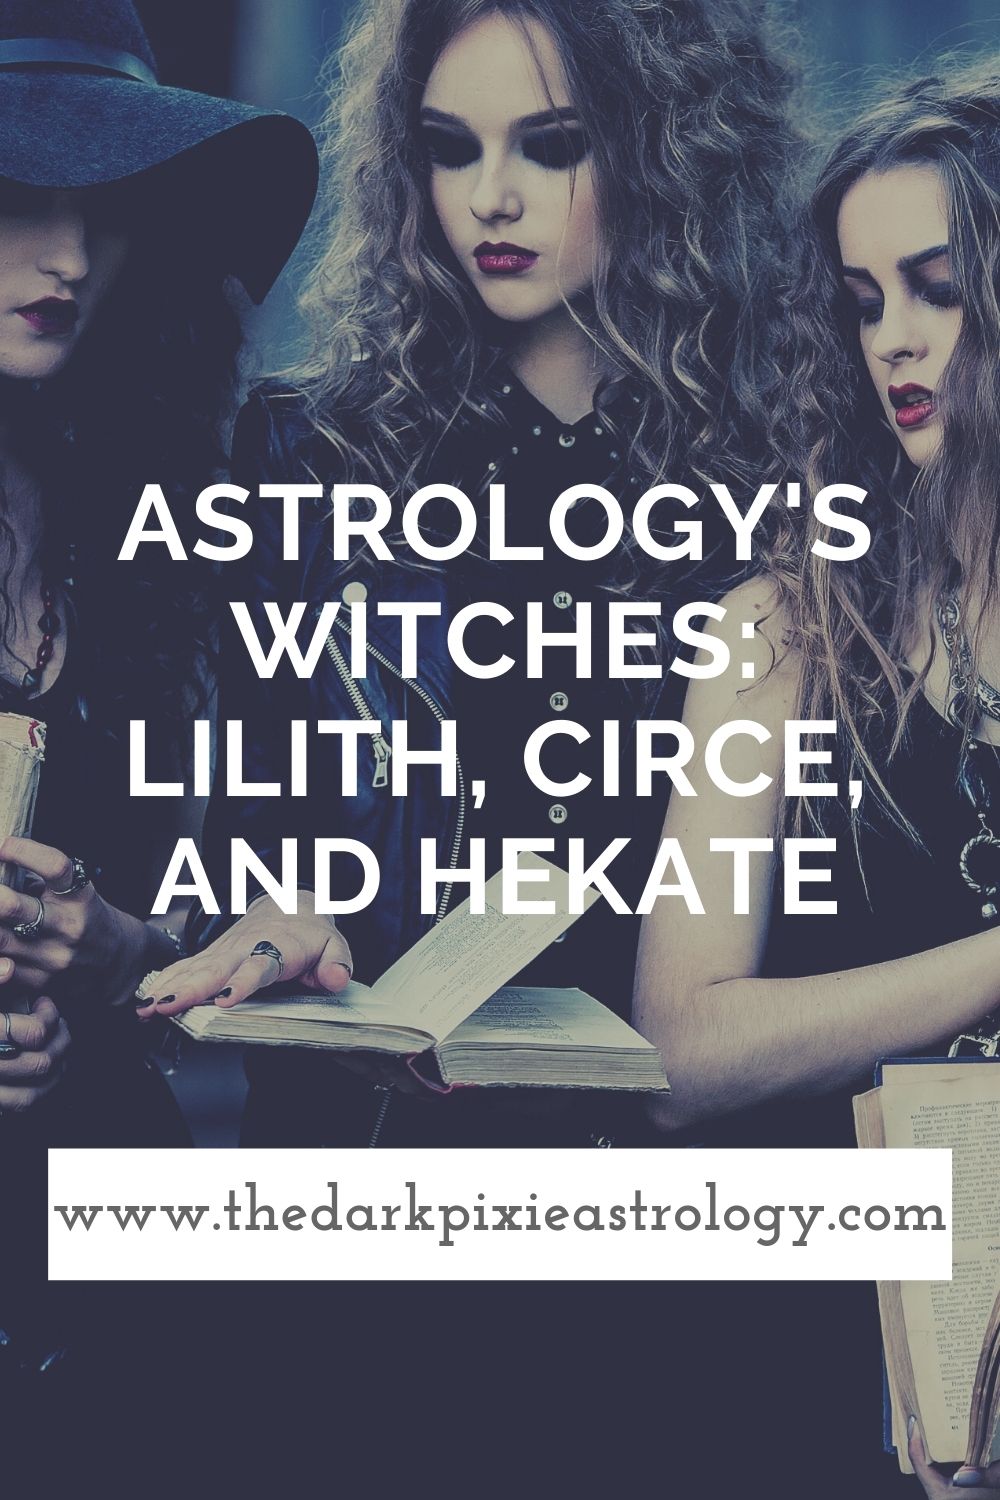 Astrology's Witches: Lilith, Circe, and Hekate - The Dark Pixie Astrology